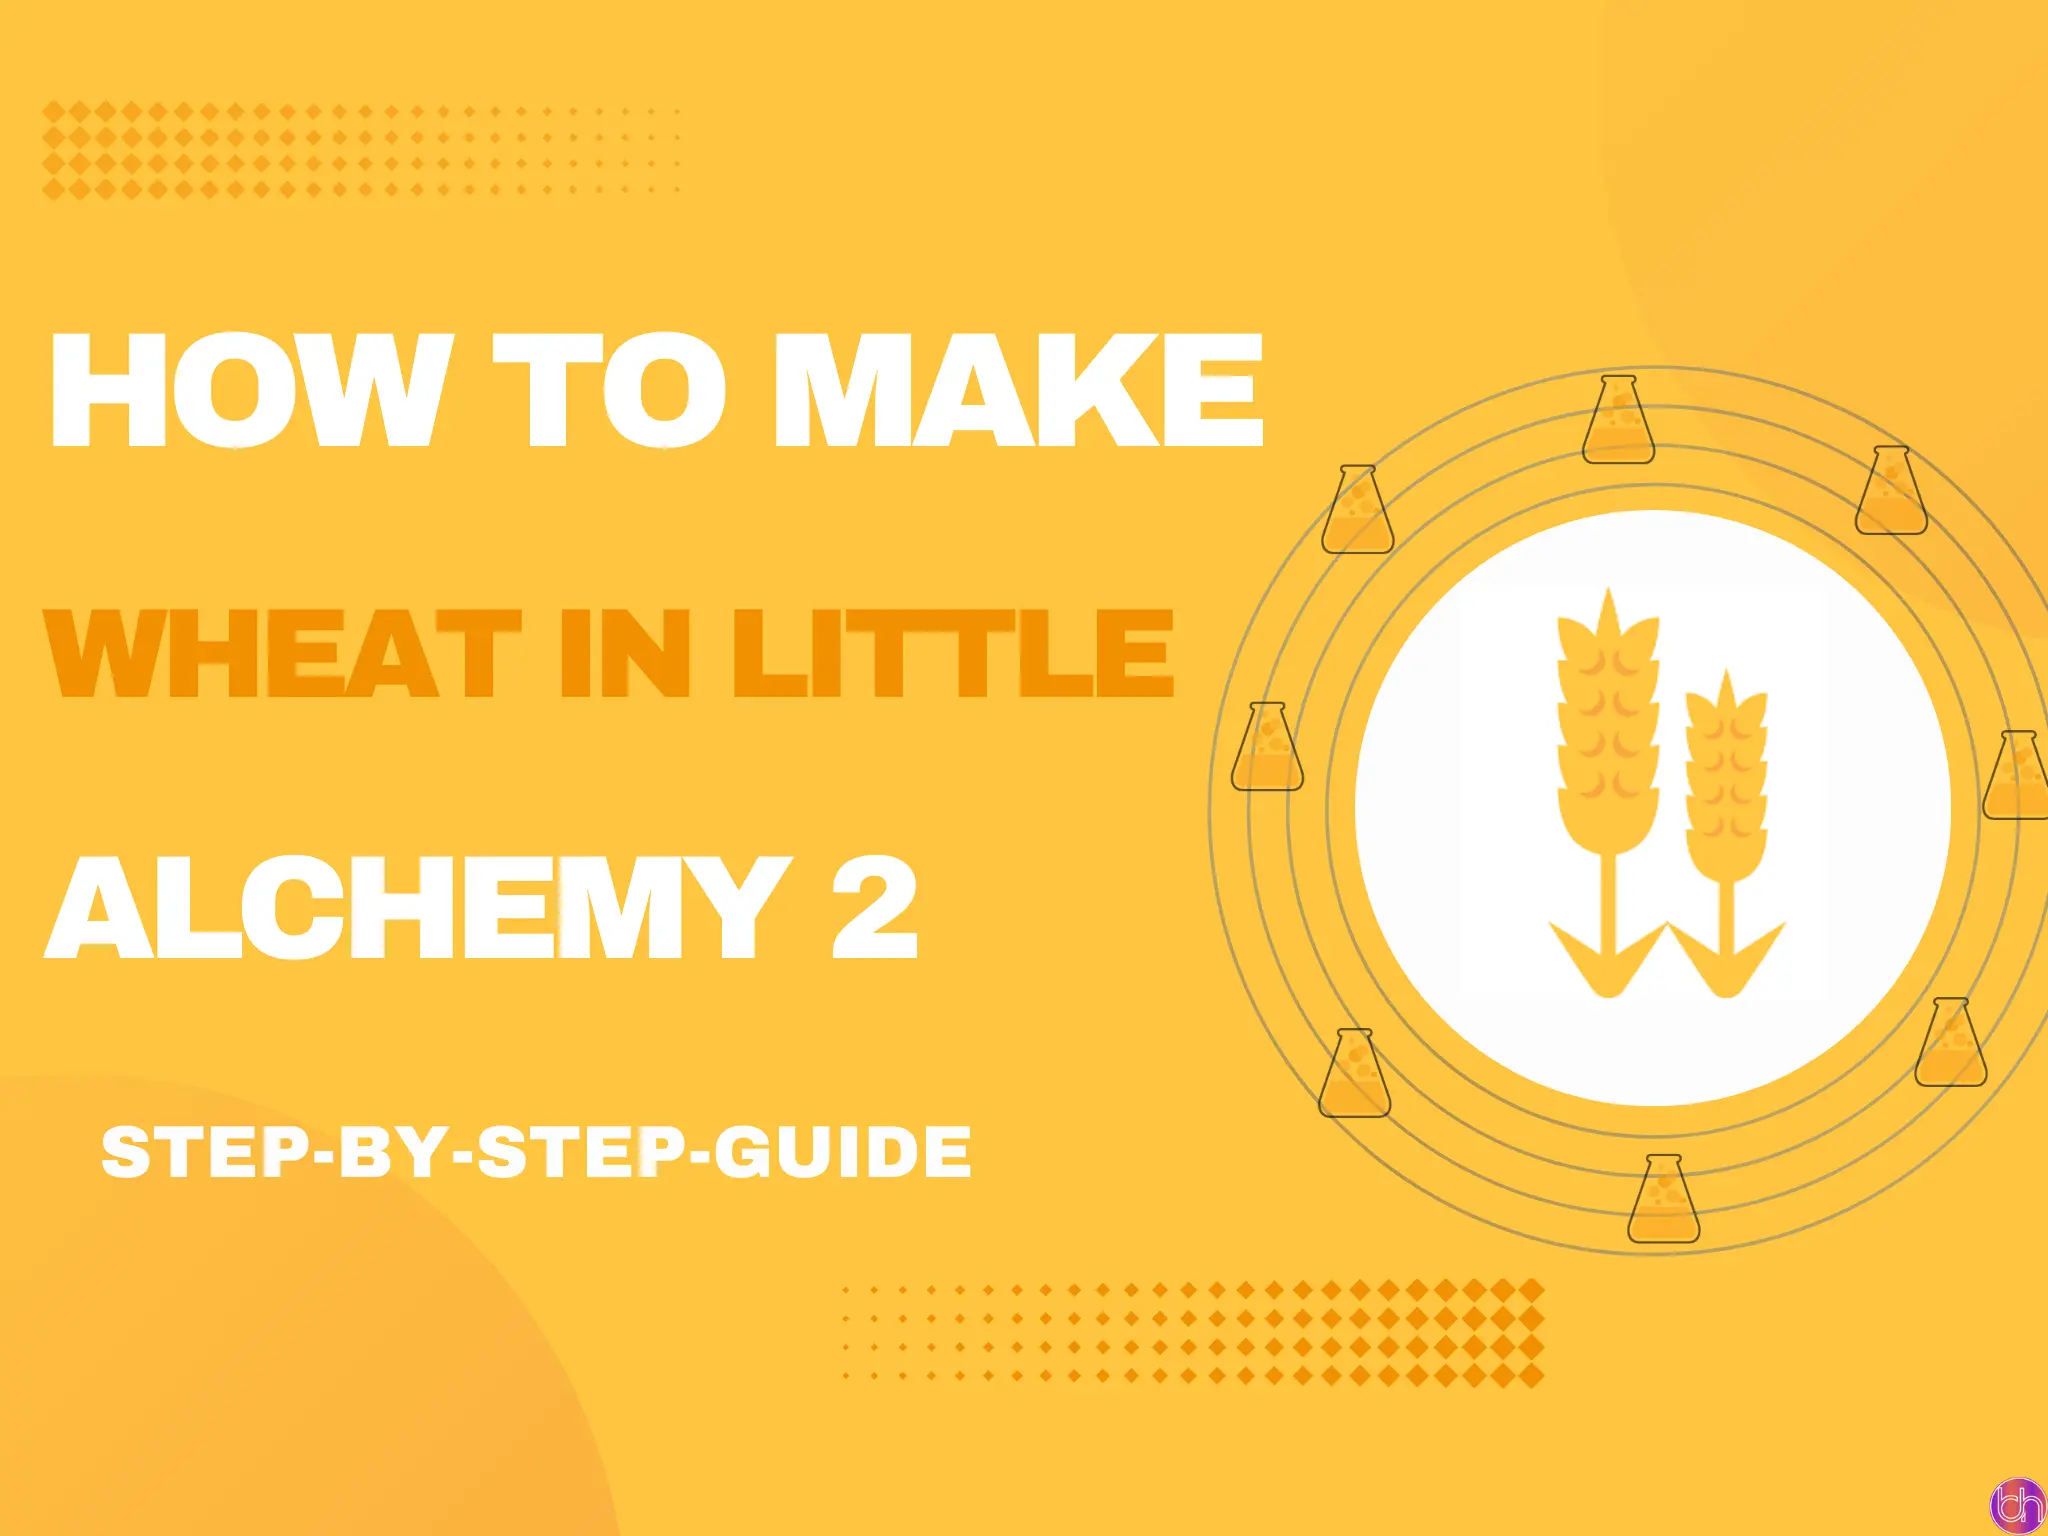 How to make Wheat in little alchemy 2